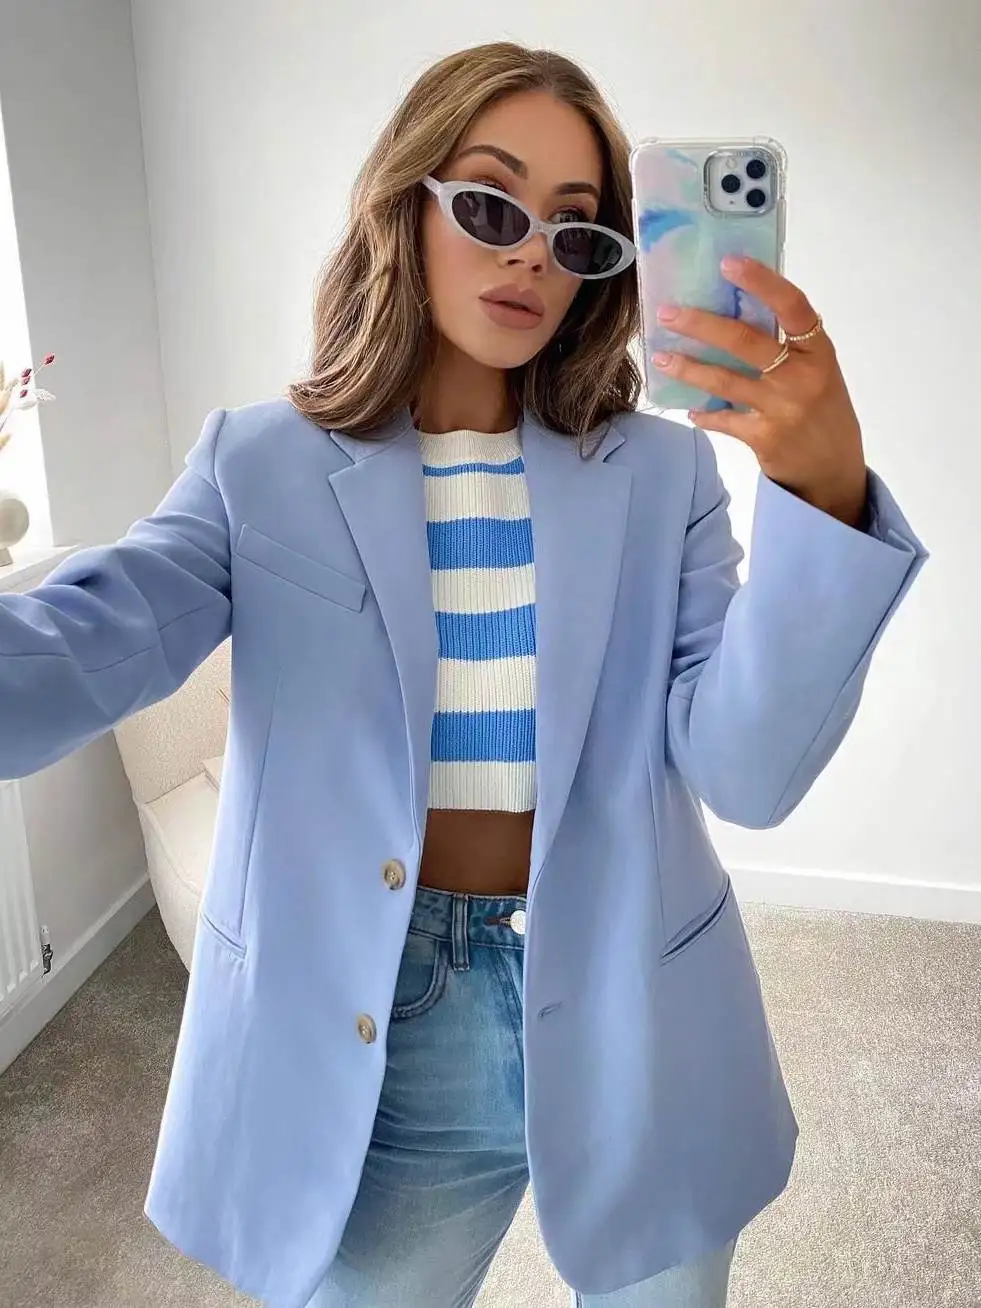 

New Arrivals Women Solid Candy Blue Blazer Coat za Vintage Notched Collar Pocket Fashion Female Oversized Casual Chic Tops 2022